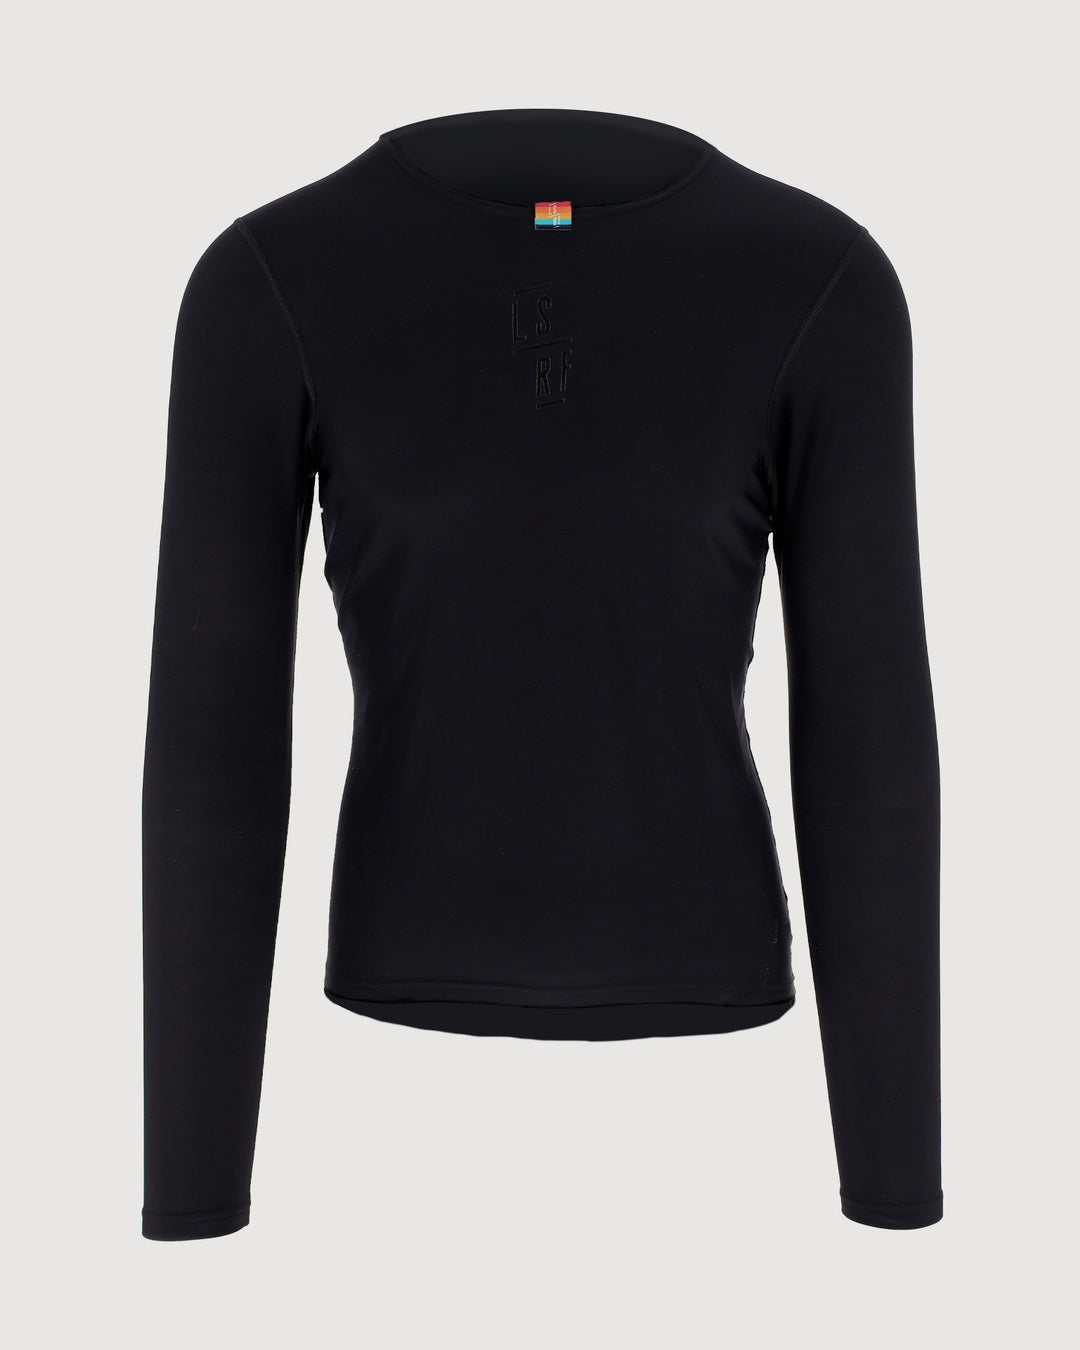 Cycling clothing winter baselayer in black LSRF 2024